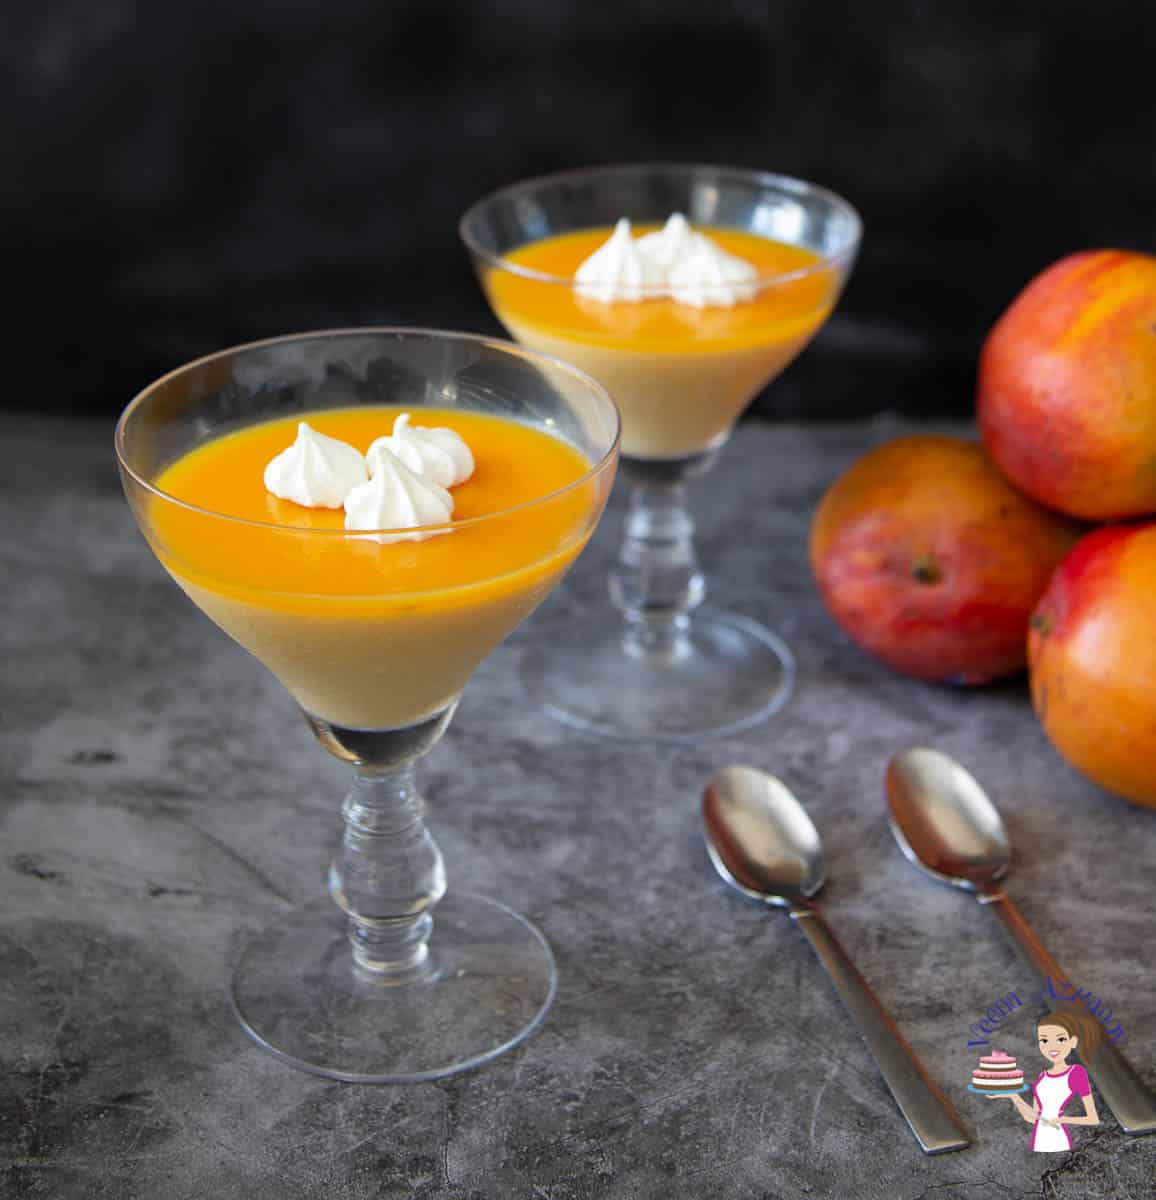 Two wine glasses with Mango Panna cotta